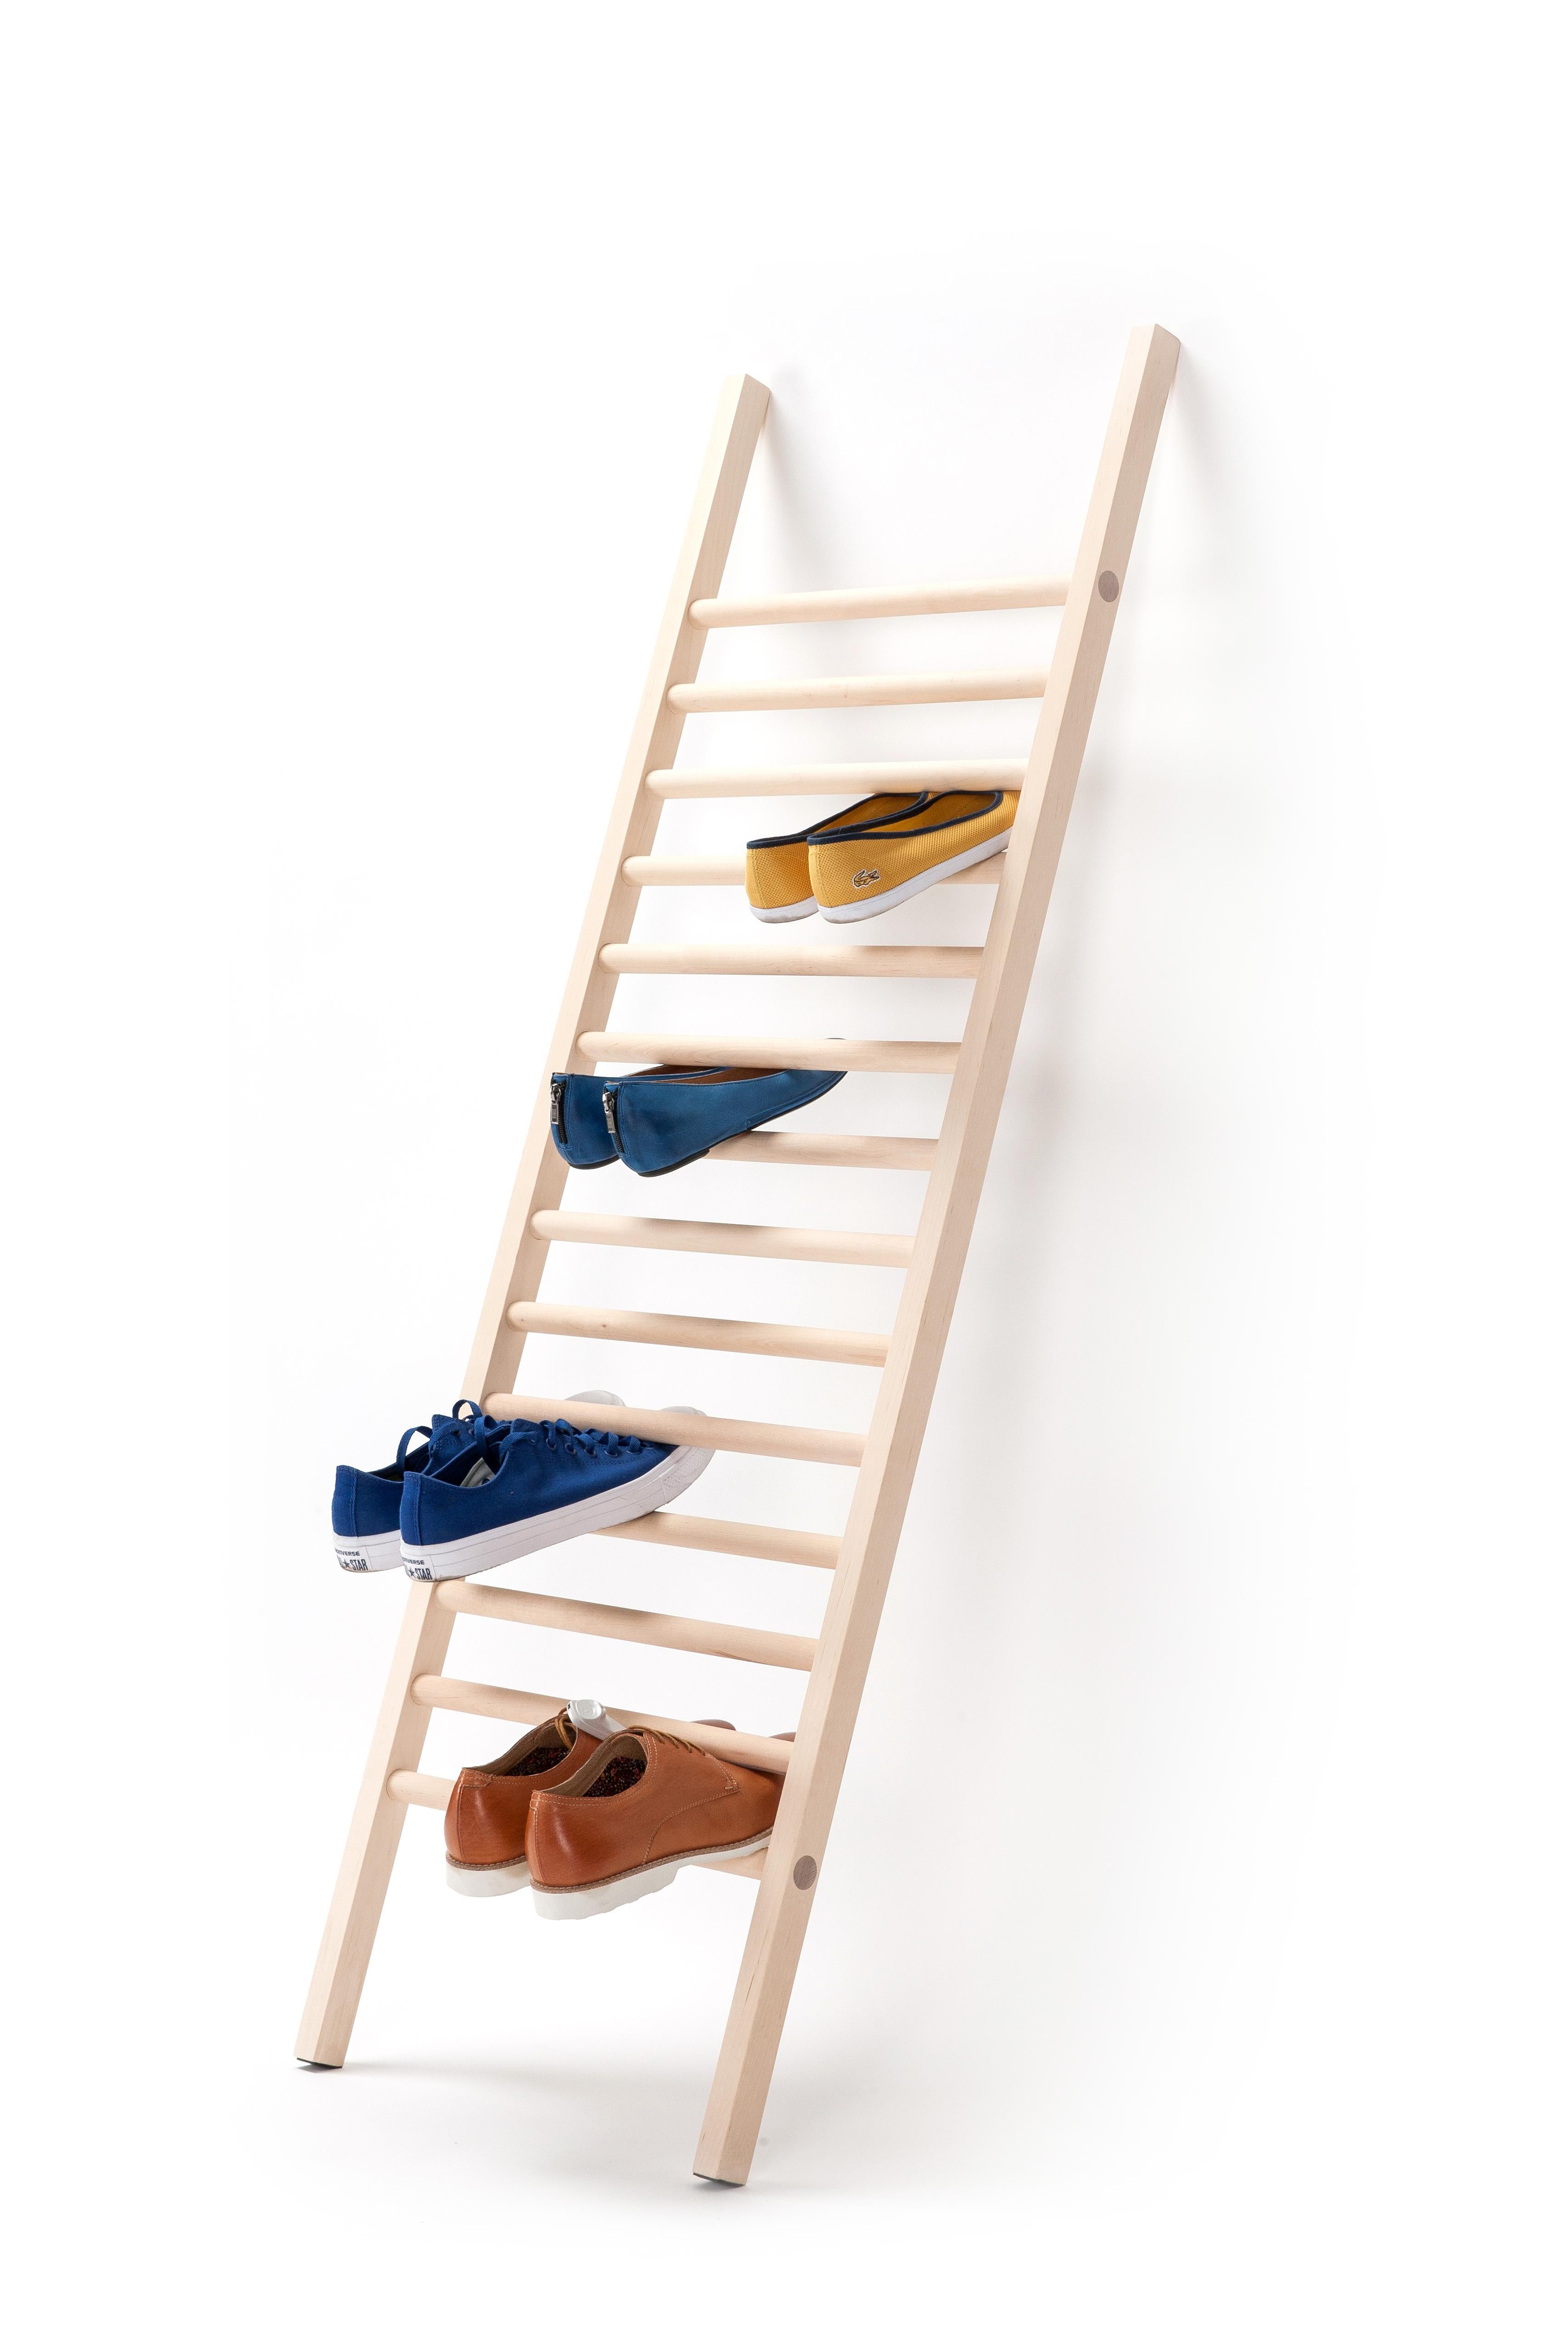 For your lovely shoes.
This simple solution to store shoes and always have them in sight, designed by Tore Bleuzé, feels so obvious and natural that it’s almost strange it hasn’t been used before. All you need to do is gently put step up against a